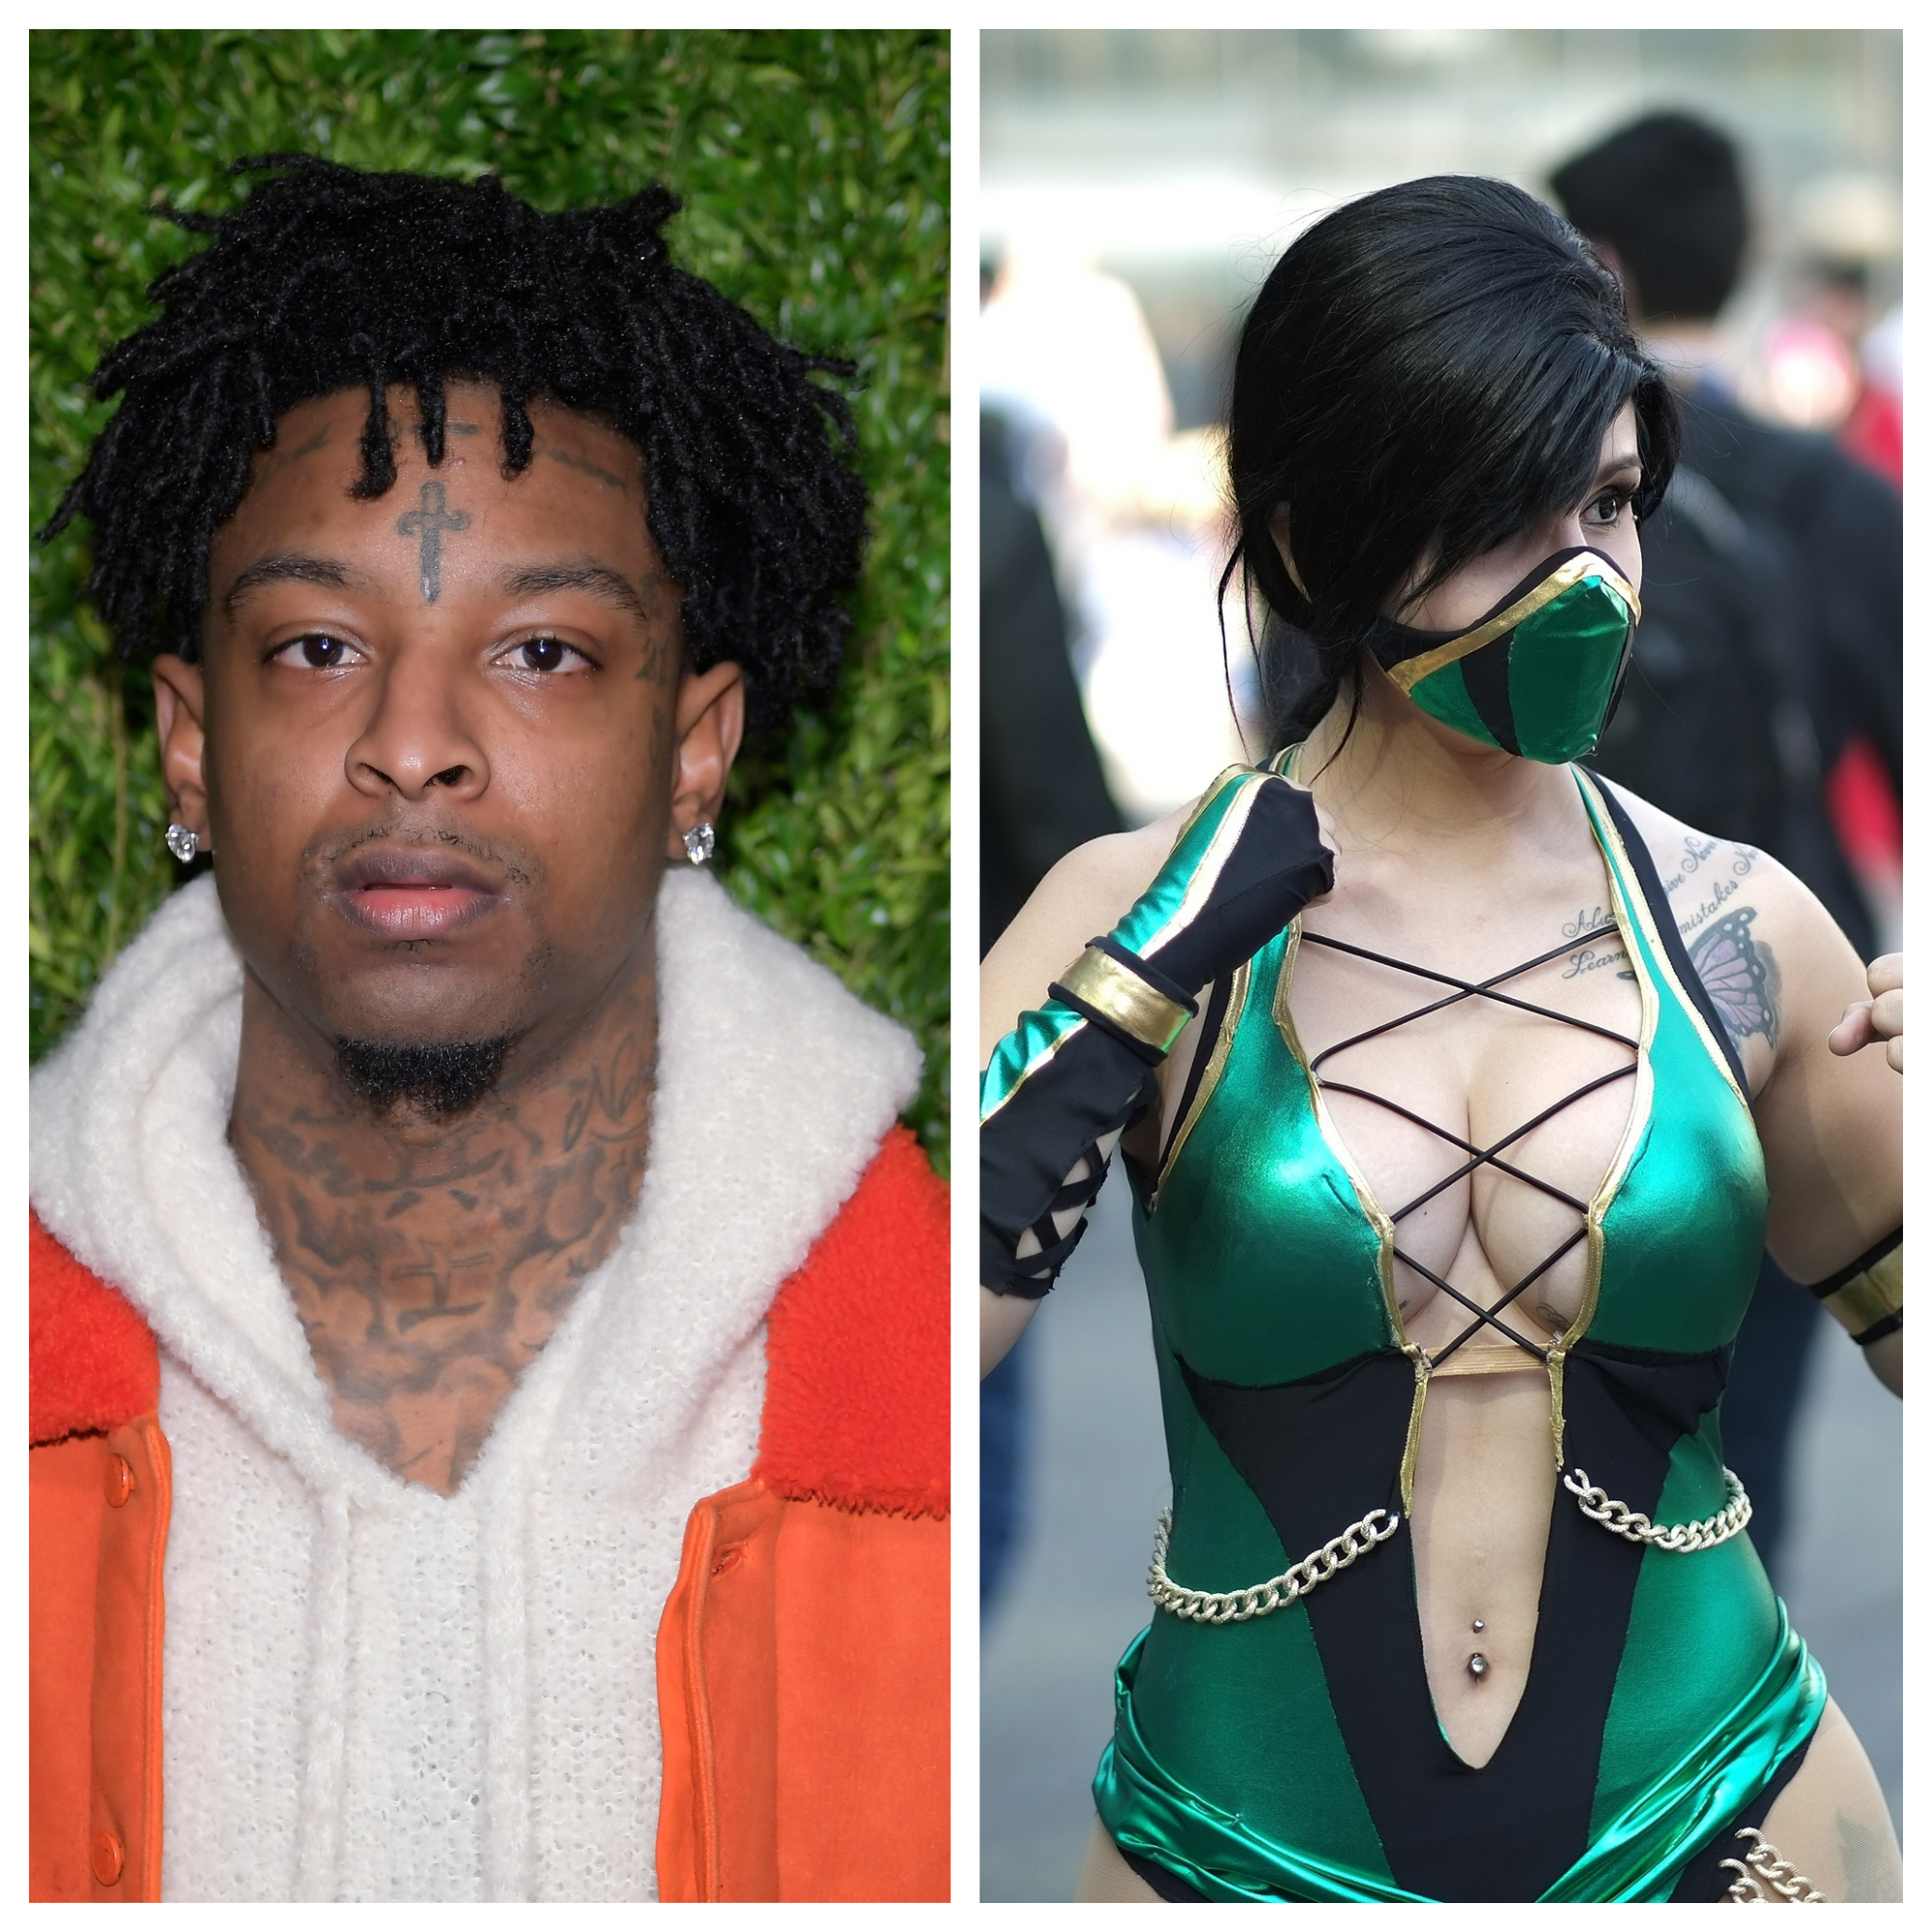 Hear a New 21 Savage Song in the Trailer for Mortal Kombat 11 - SPIN